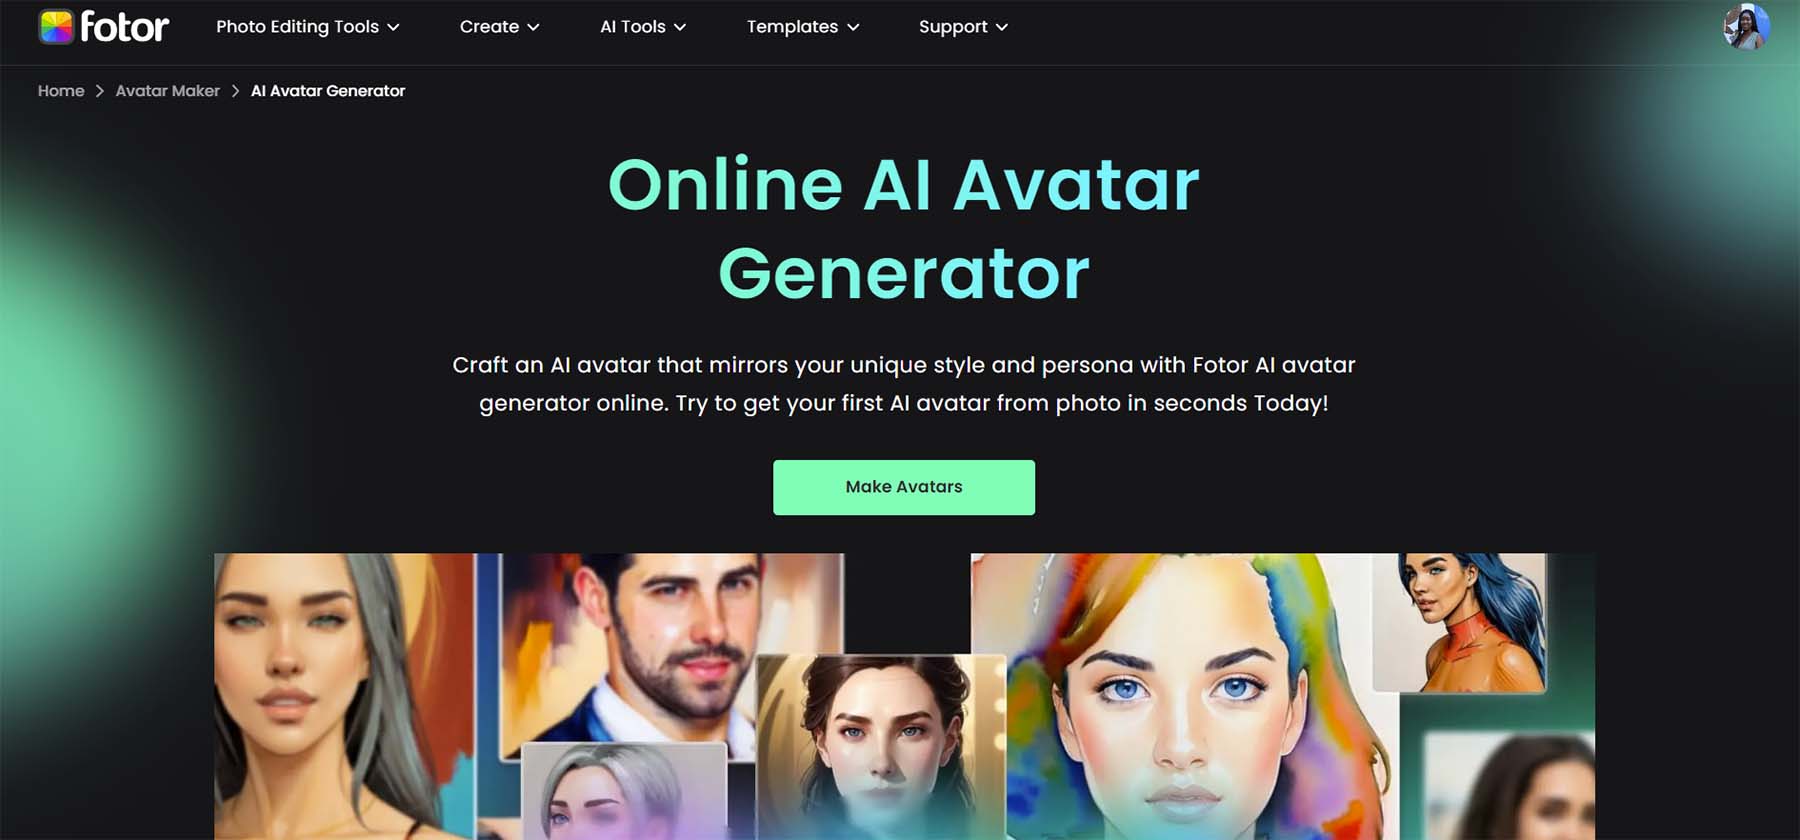 Best Discord Profile Picture Maker and Avatar Maker Sites [2023]